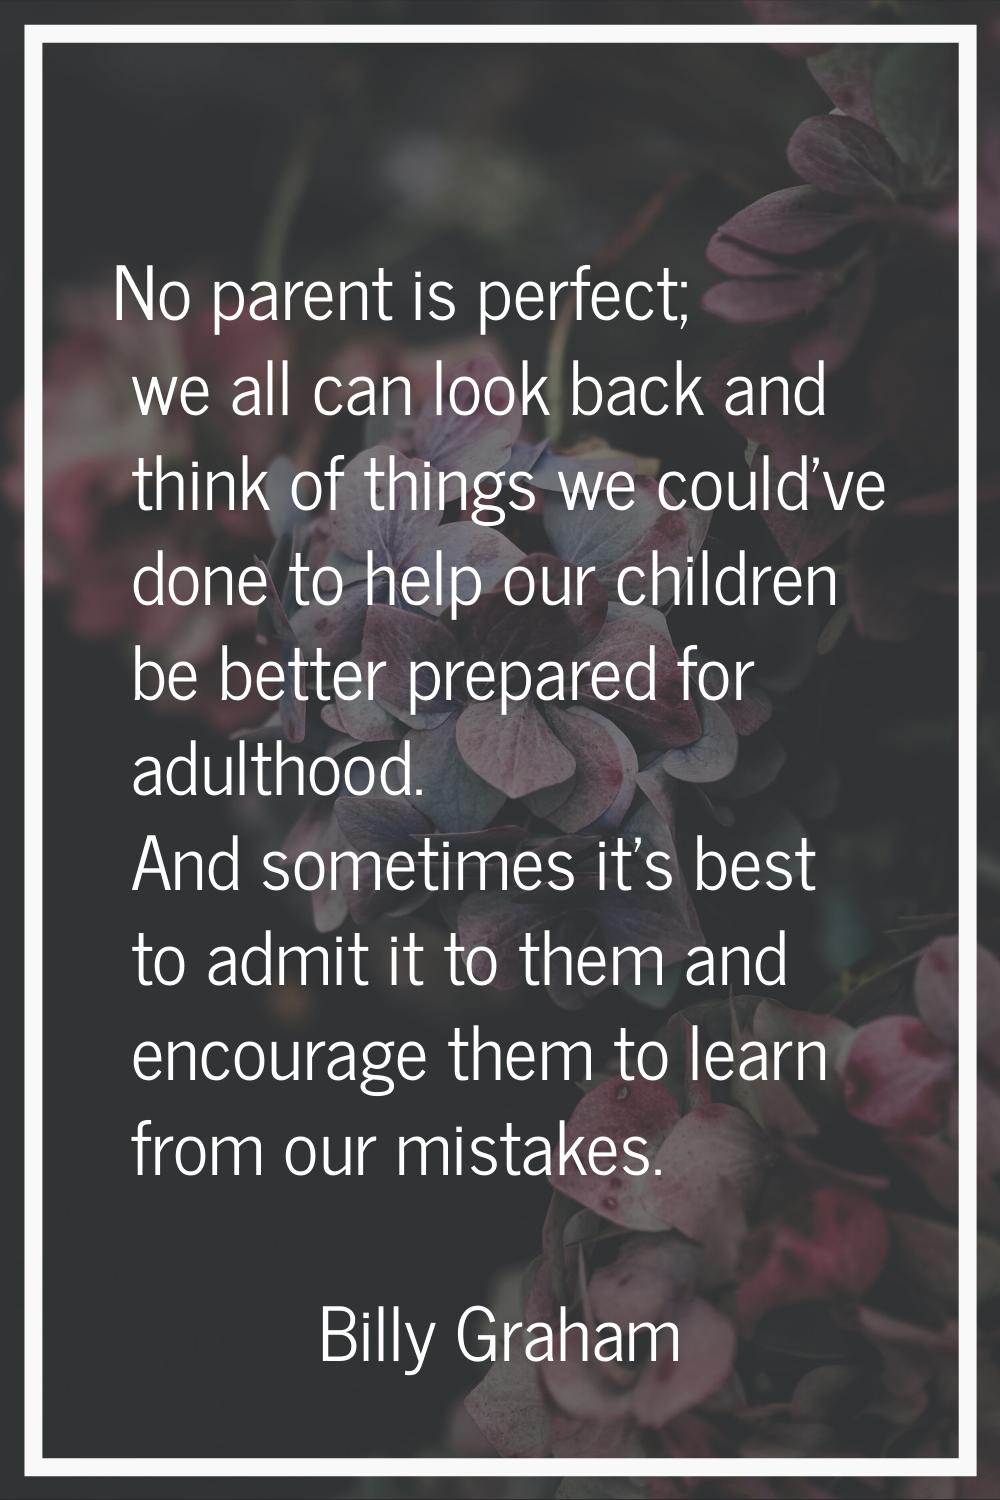 No parent is perfect; we all can look back and think of things we could've done to help our childre